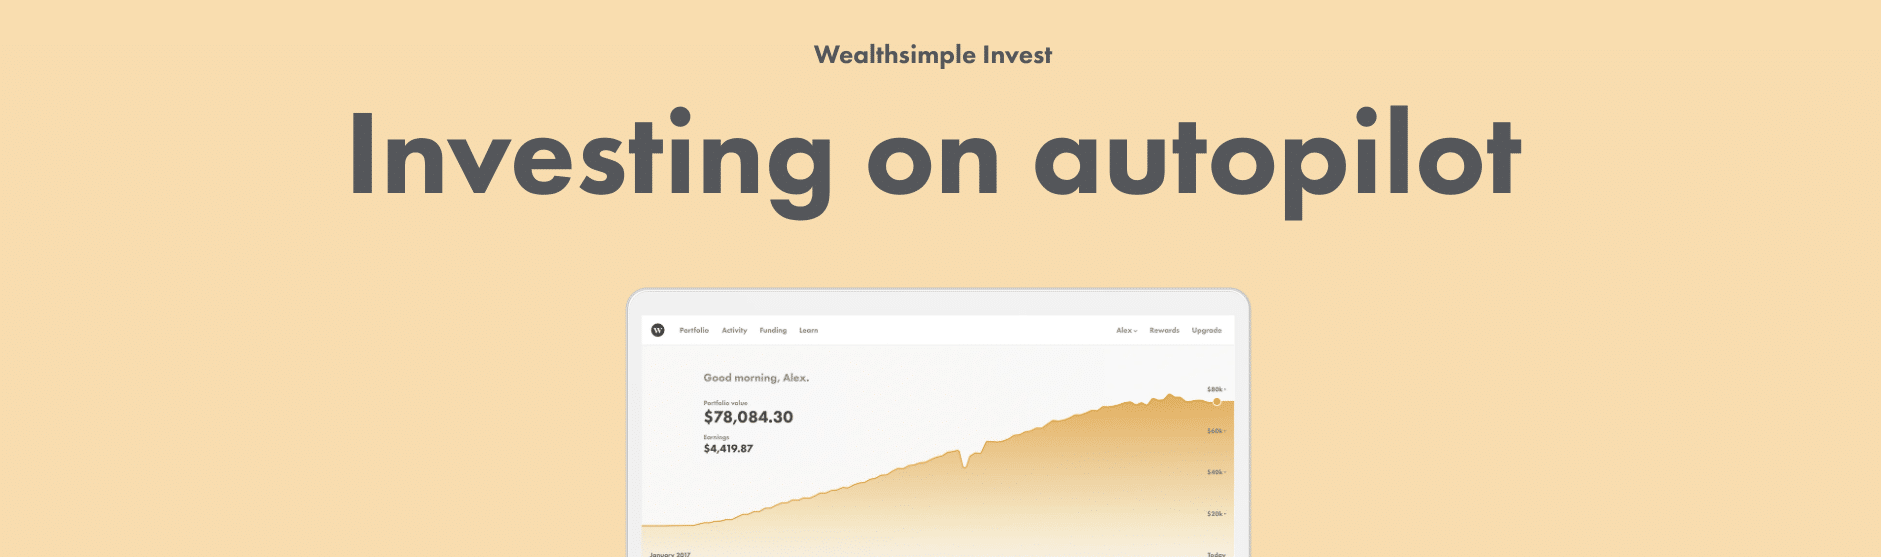 Wealthsimple investing